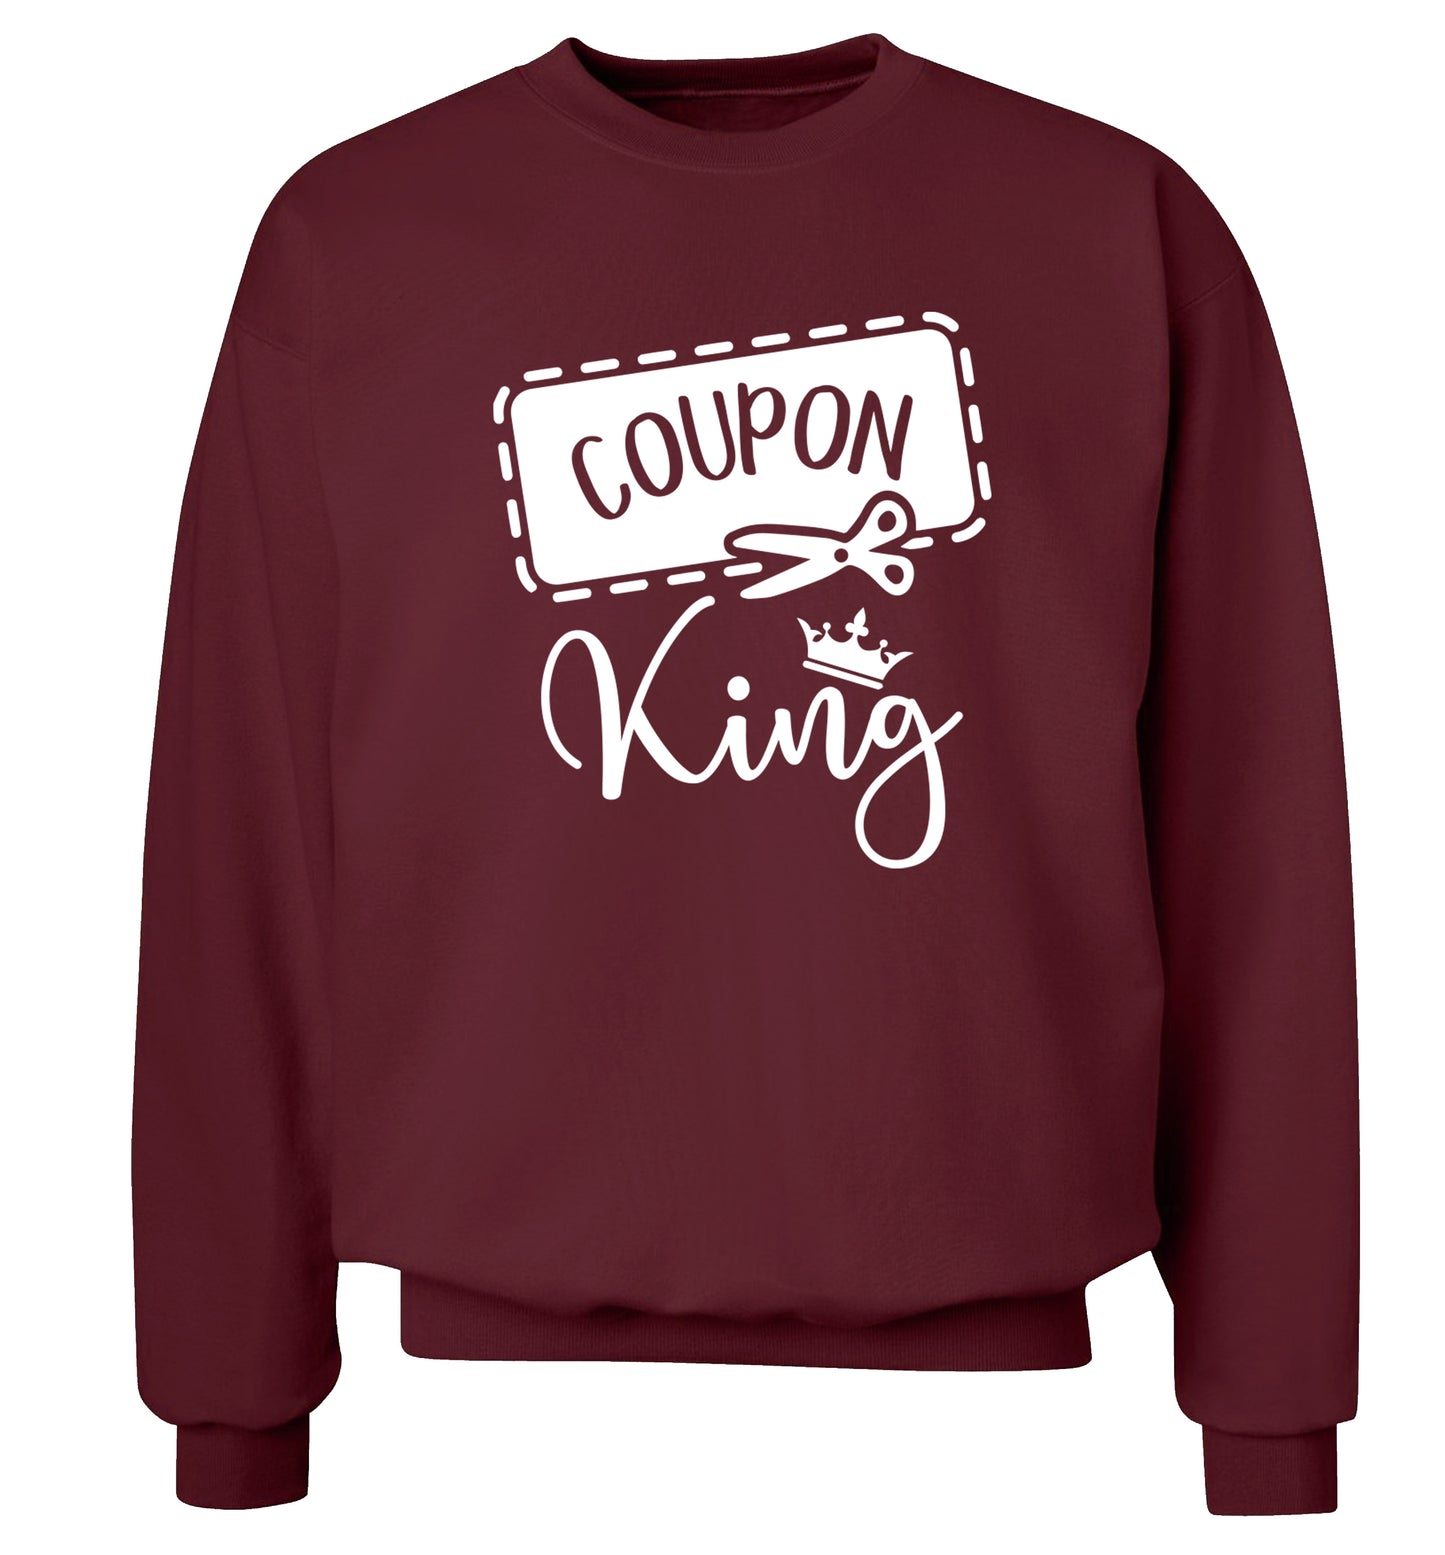 Coupon King Adult's unisex maroon Sweater 2XL